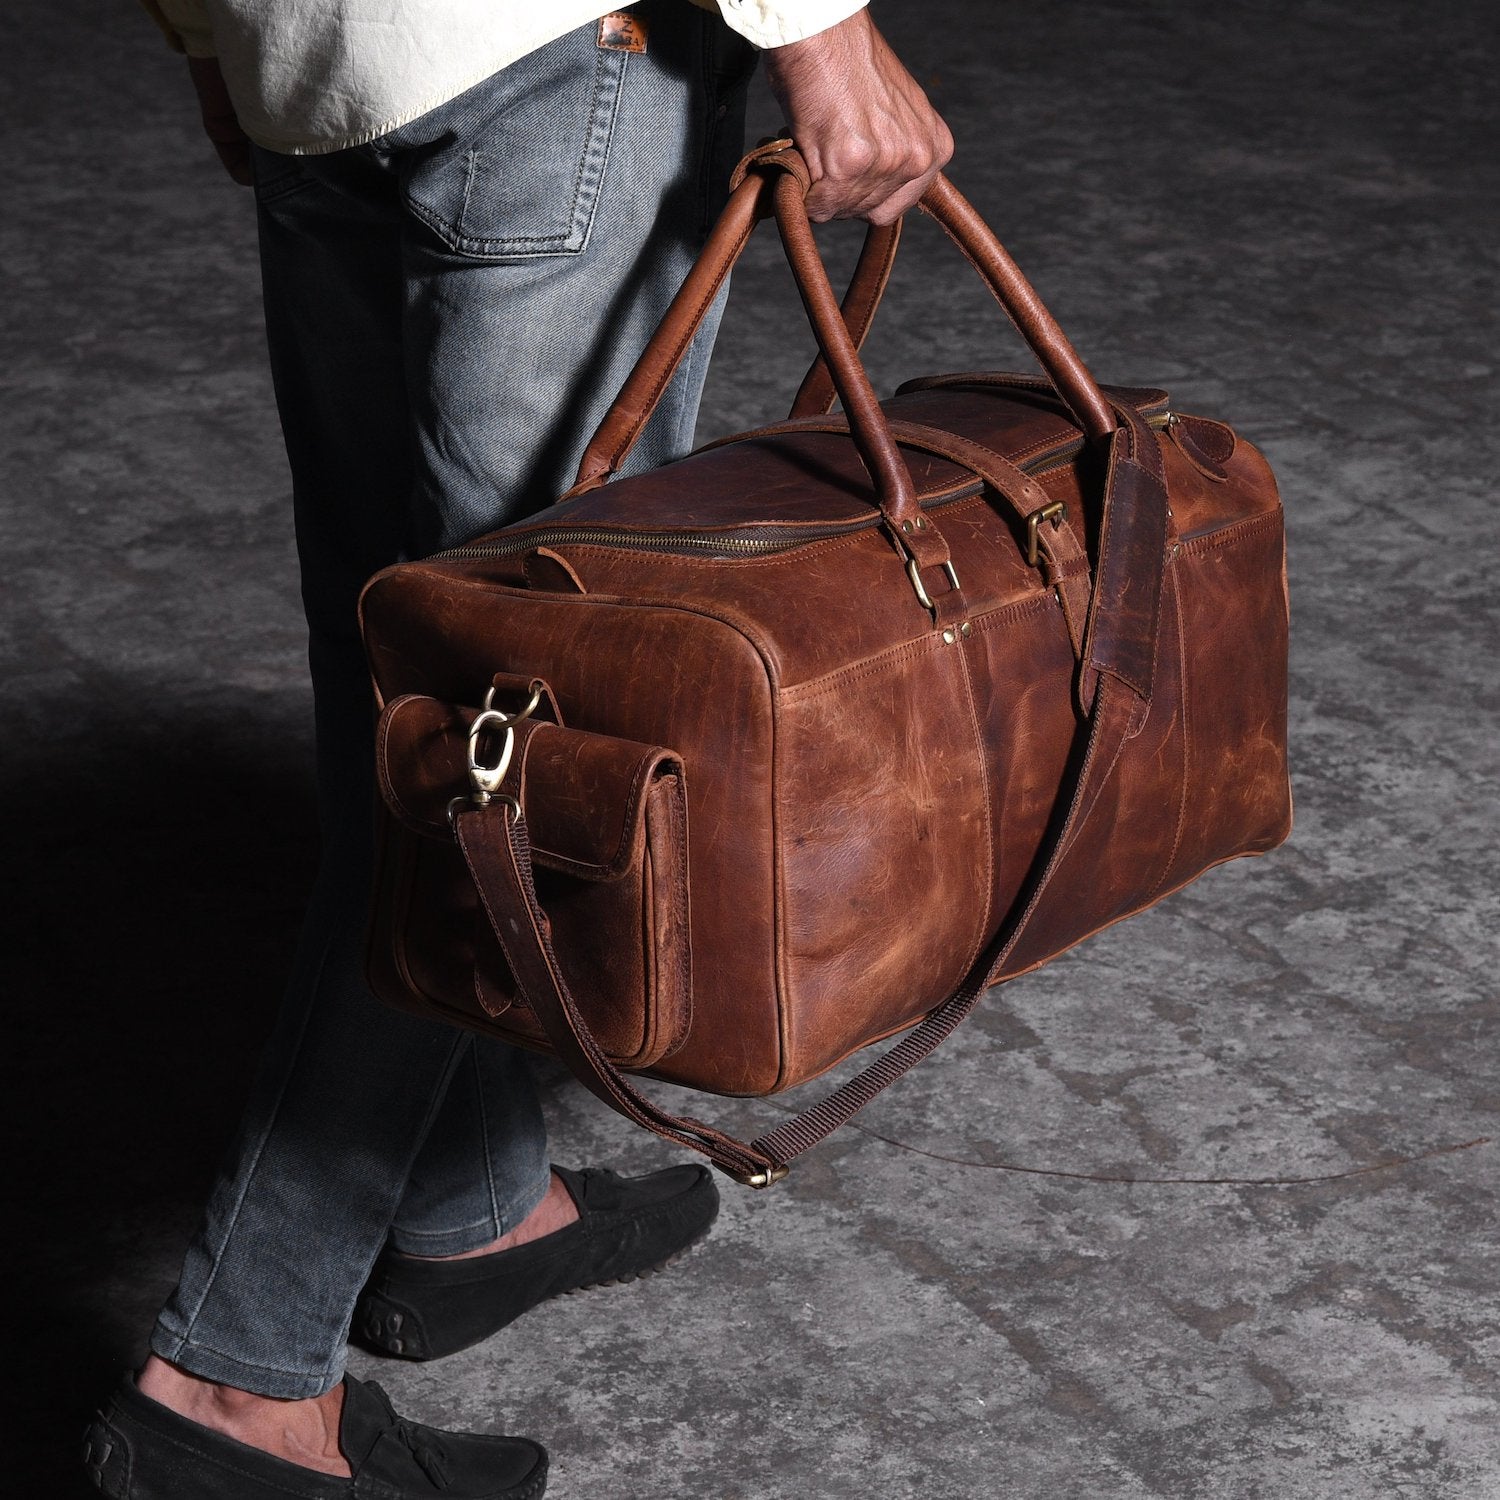 Buy Ruzioon leather duffle bags for men, travel bag, gym duffel bag, sports duffel  bag, overnight bag, weekend cabin duffel bag, carry on duffel and weekends  Online in Saint Helena, Ascension and